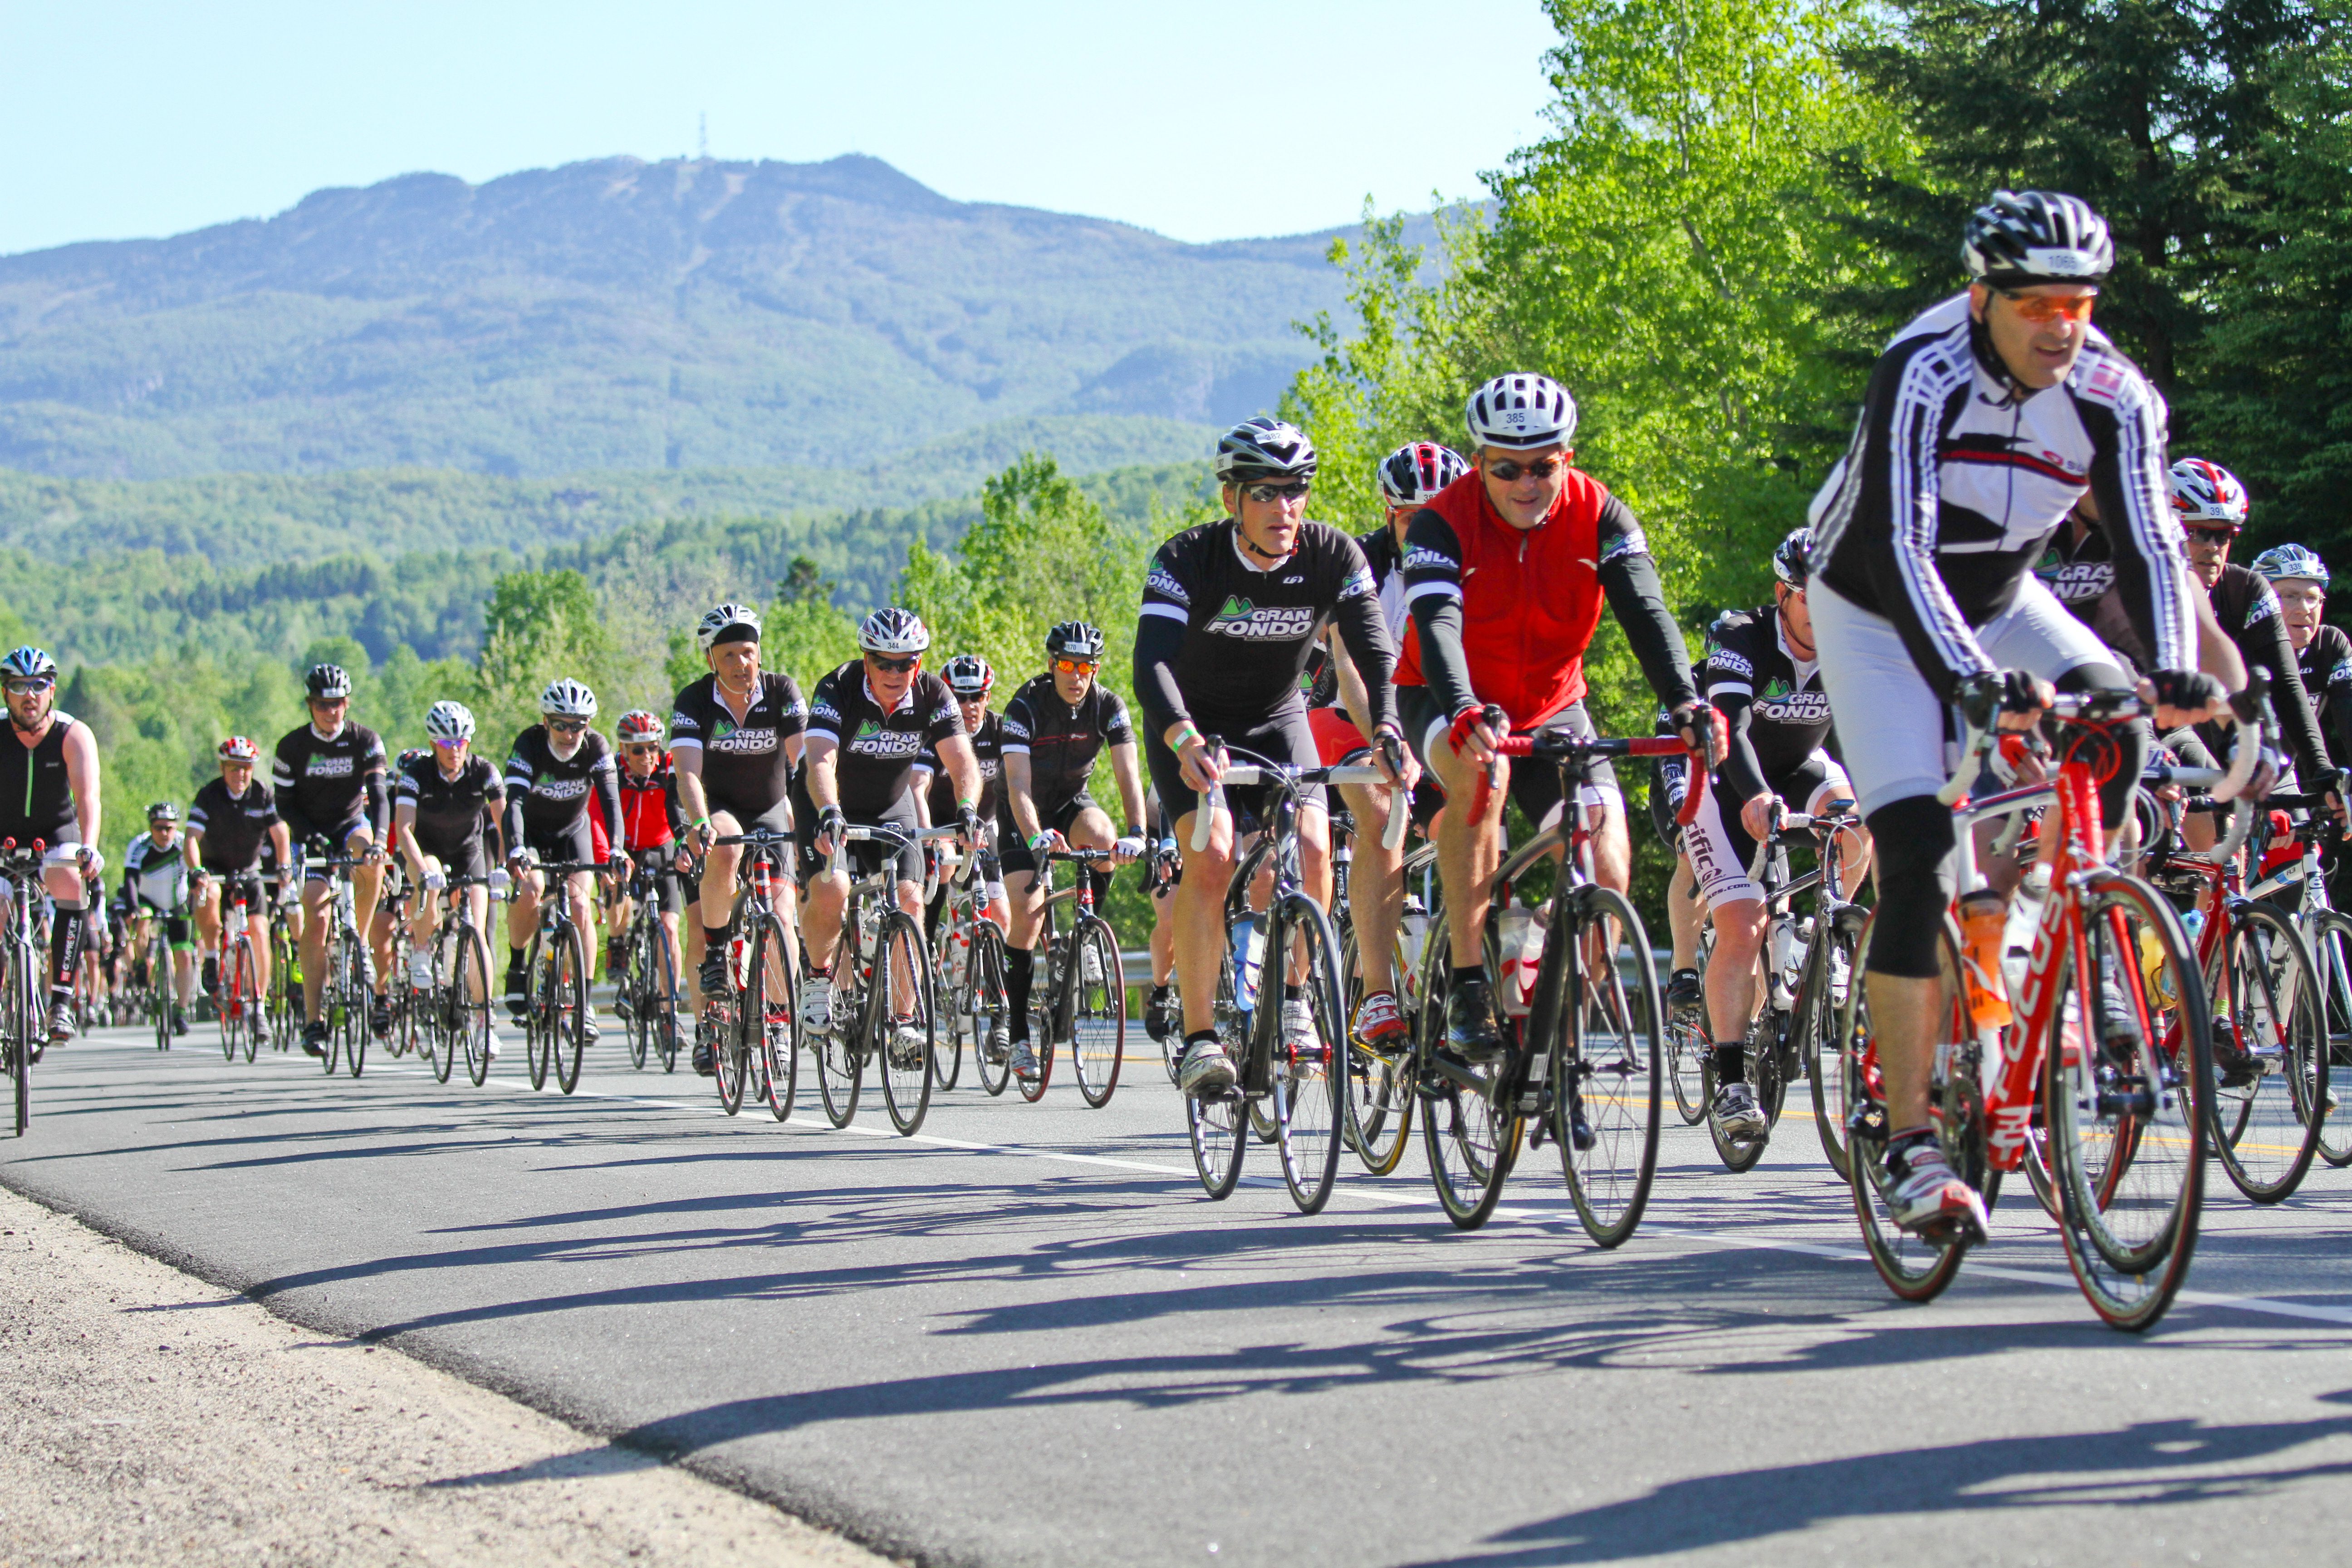 Registration opens for the fifth edition of the Gran Fondo Mont-TremblantDecember 2, 2016 - Canadian Cycling Magazine (blog)